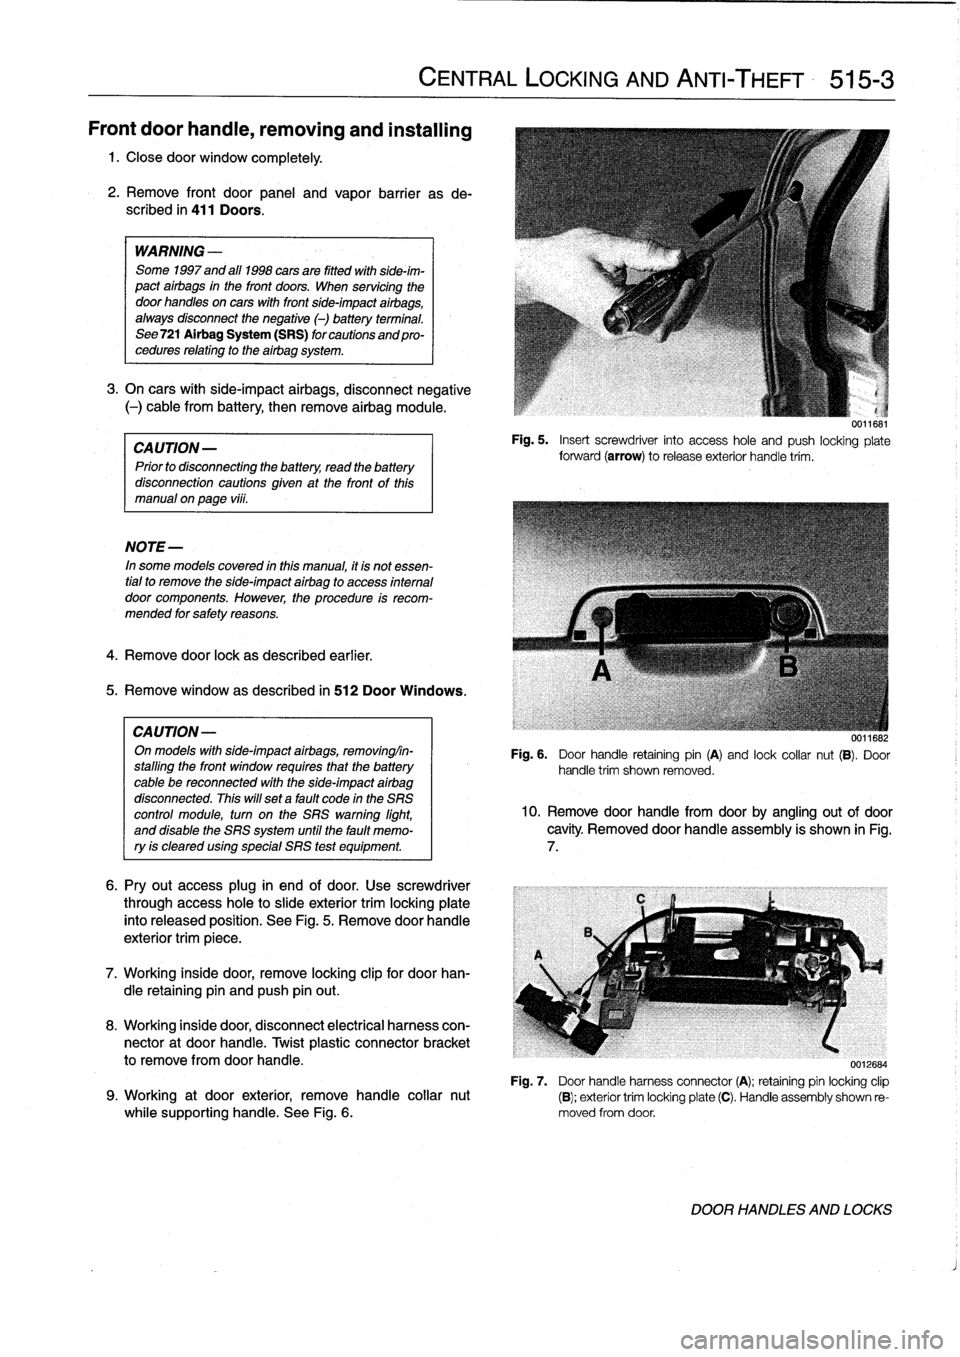 BMW 328i 1998 E36 Workshop Manual 
Front
door
handle,
removing
and
installing

1
.
Closedoor
window
completely
.

2
.
Remove
front
door
panel
and
vapor
barrier
asde-
scribed
in
411
Doors
.

WARNING
-

Some
1997
and
al]
1998
cars
are
f